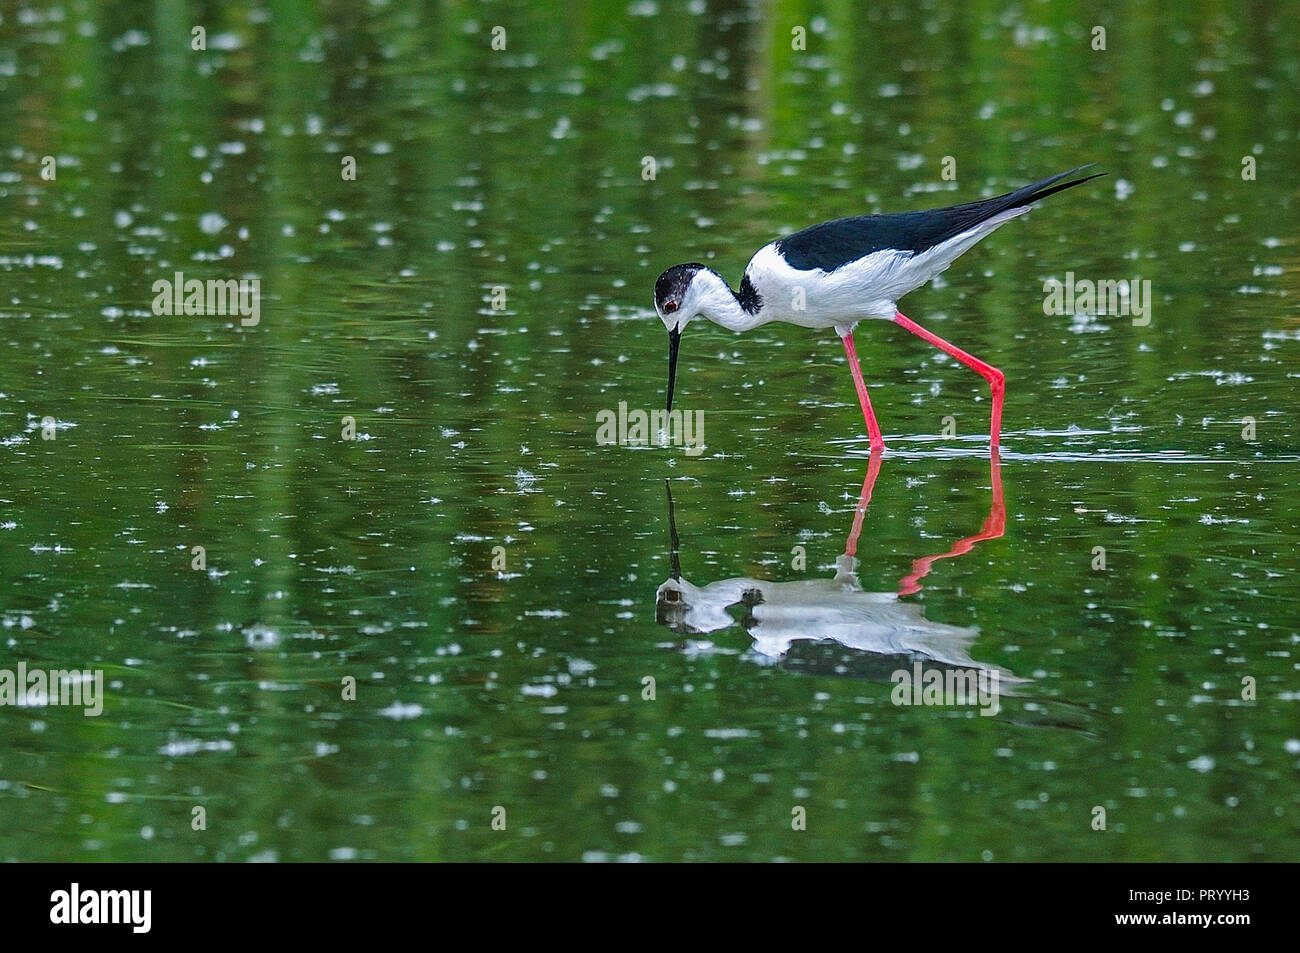 Black-winged stilt wading in water Stock Photo